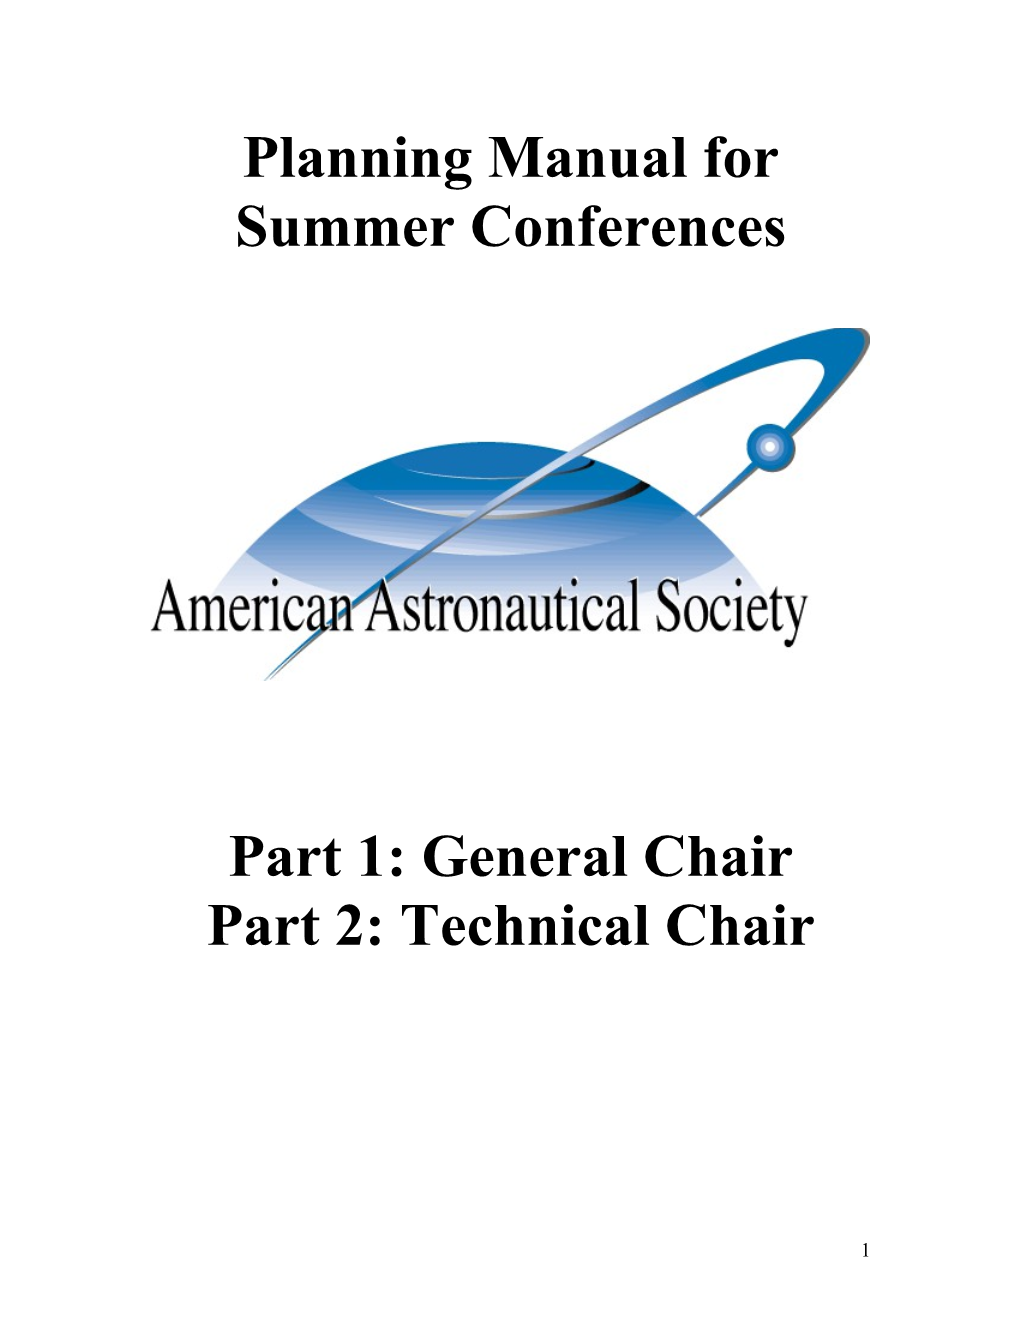 Manual for General Chairs of the Summer Conference